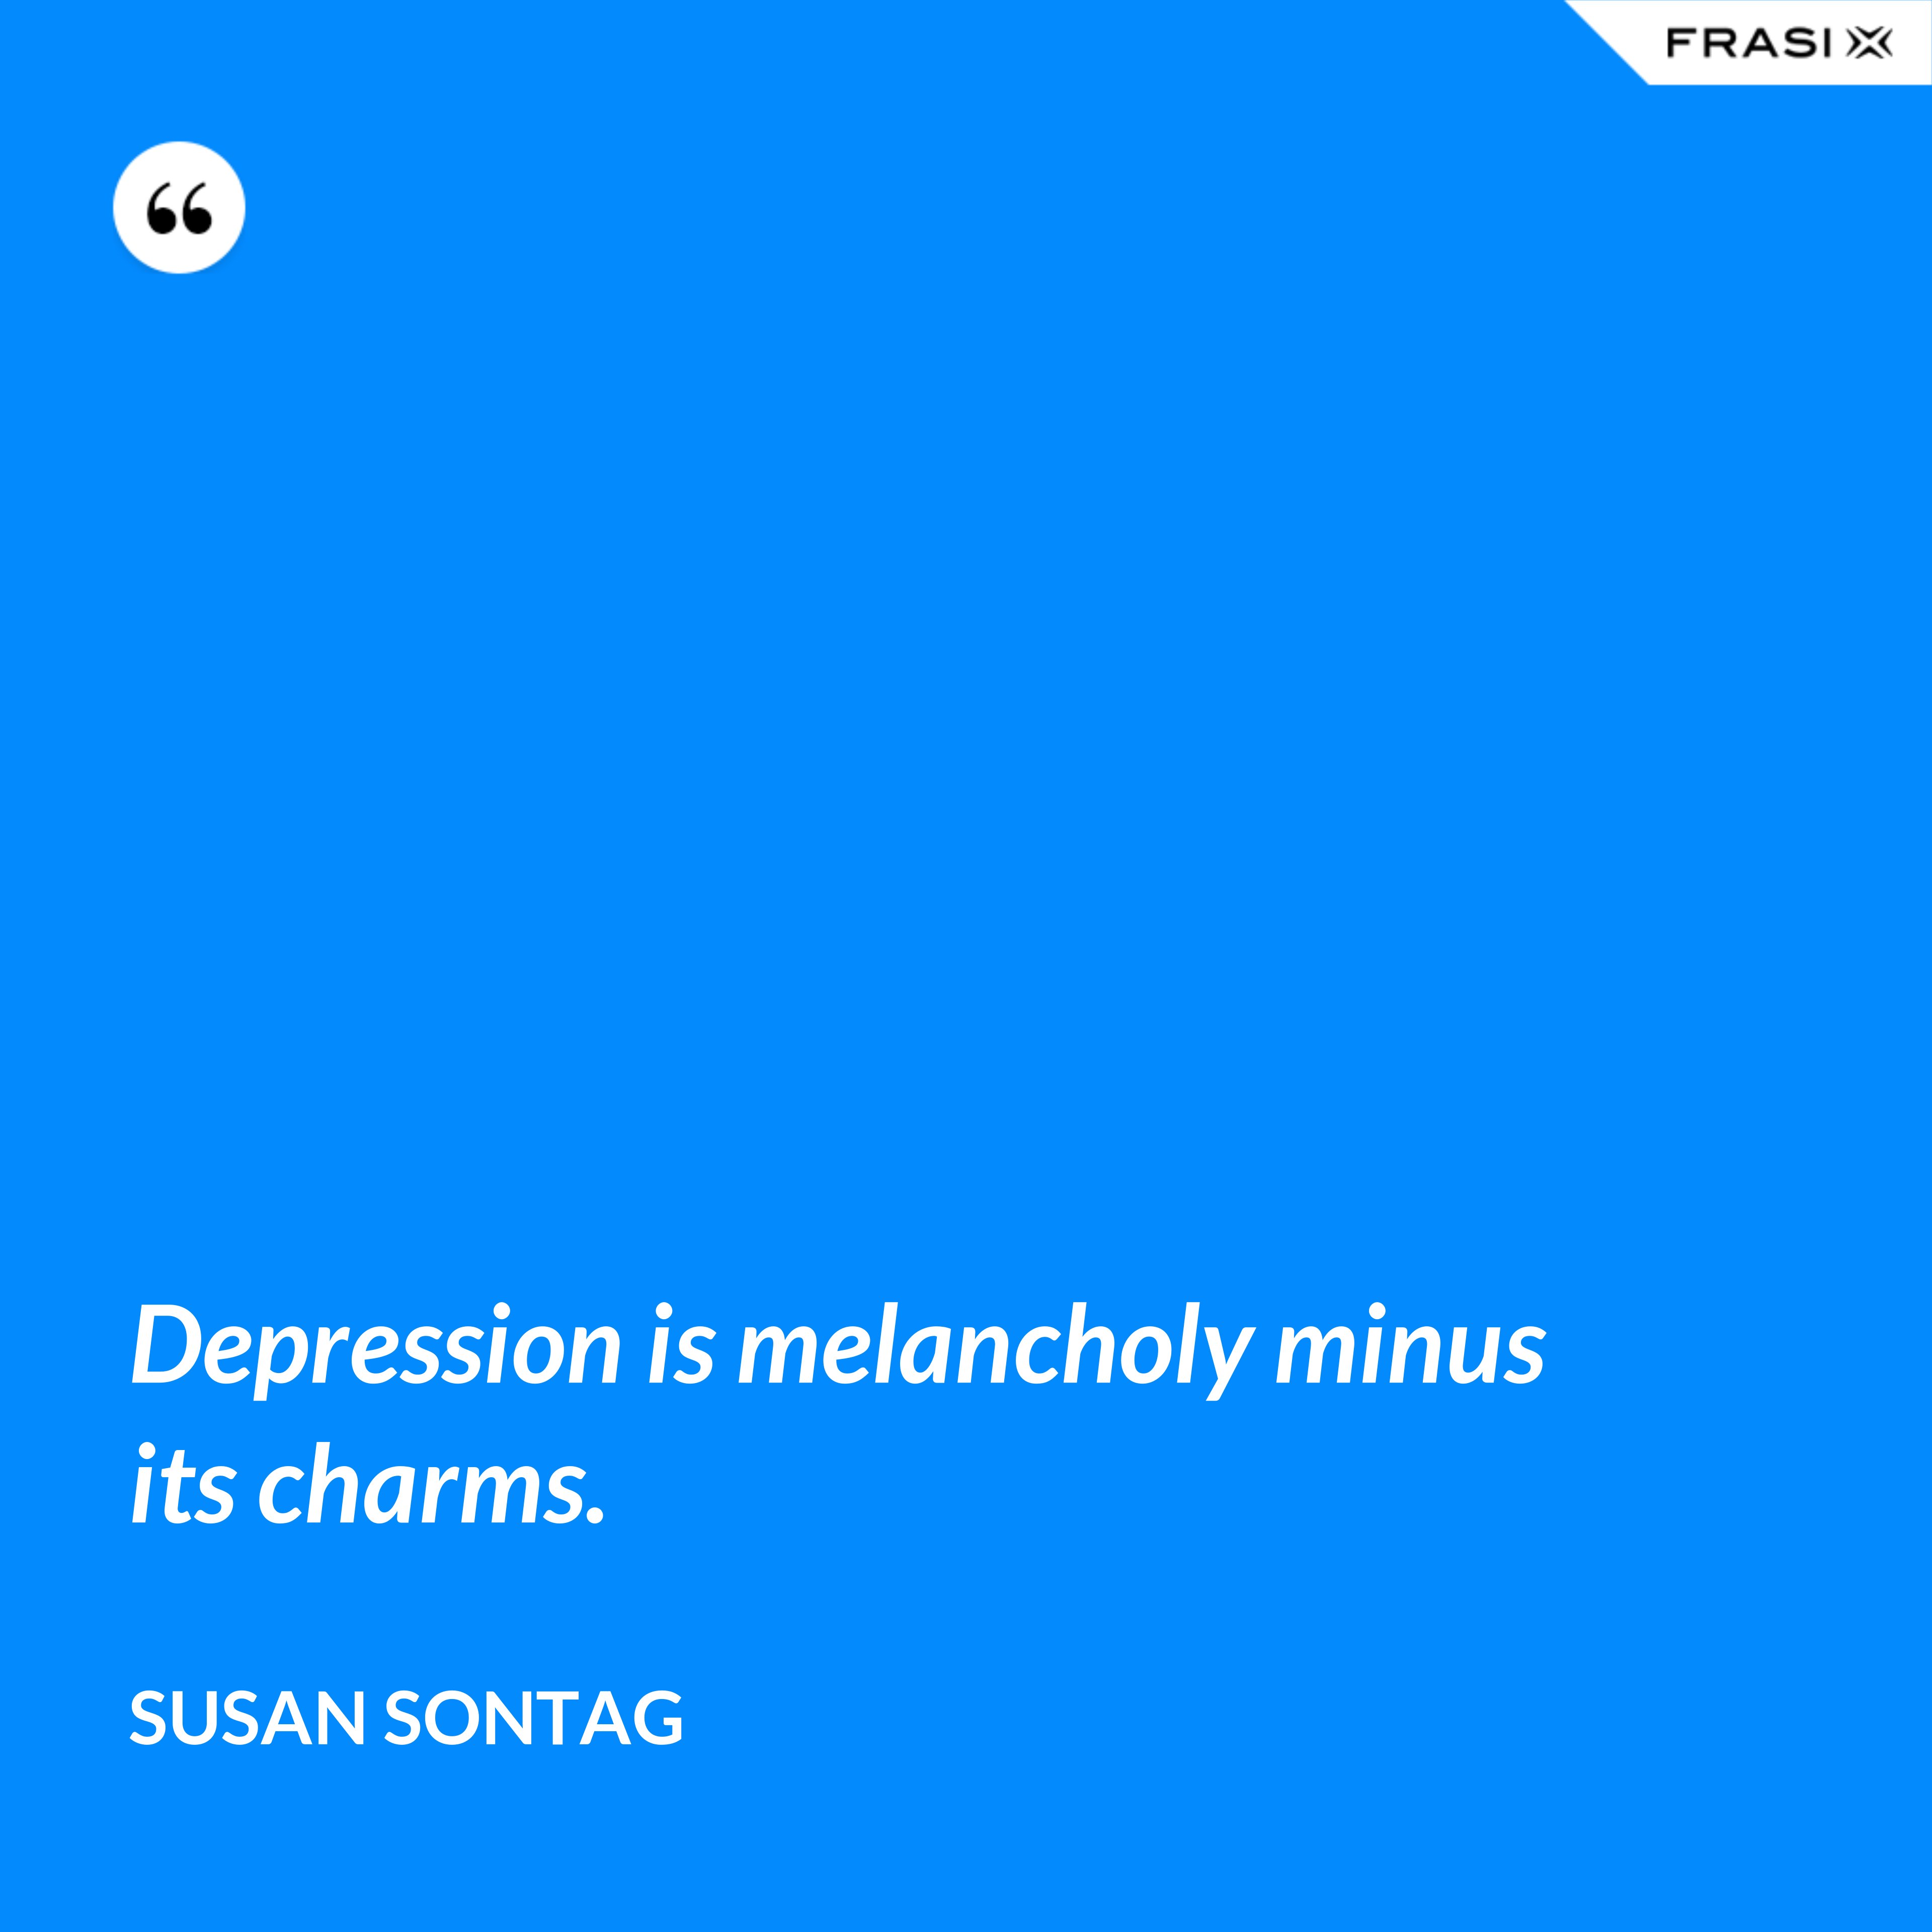 Depression is melancholy minus its charms. - Susan Sontag